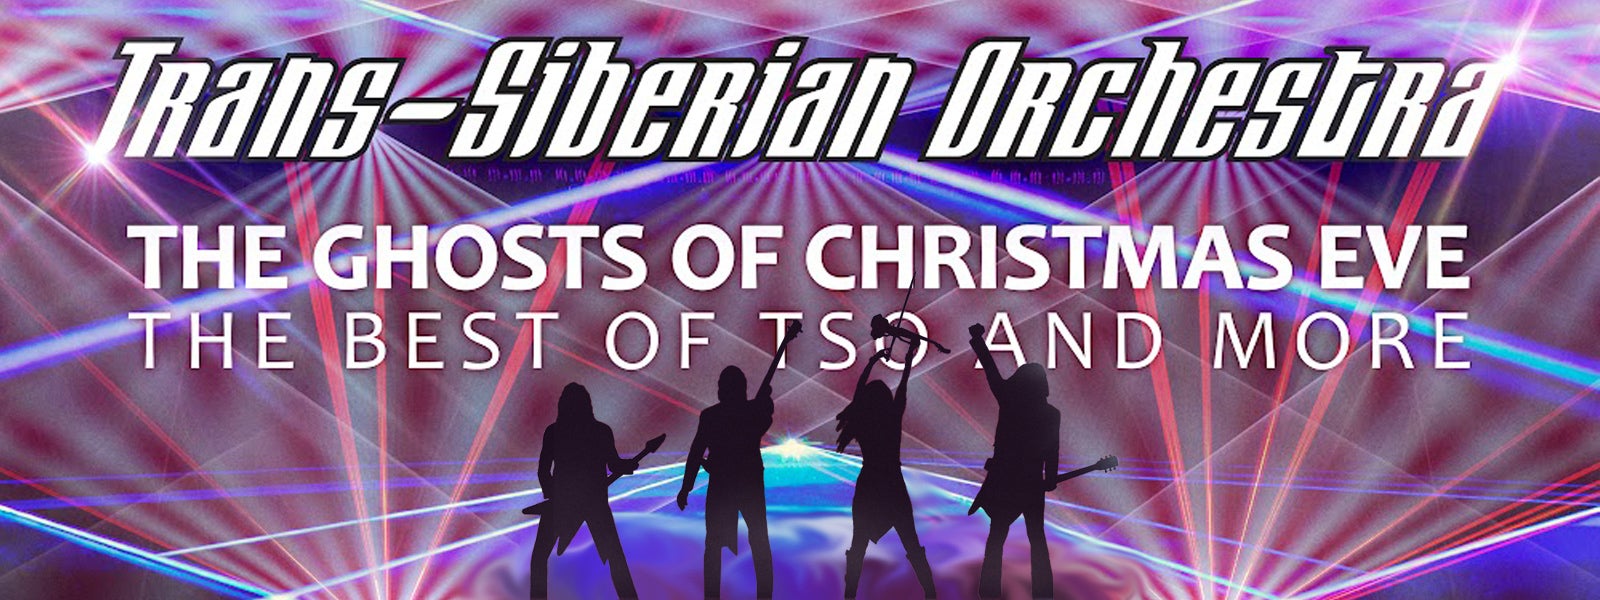 Trans-Siberian Orchestra: Ghosts of Christmas Eve